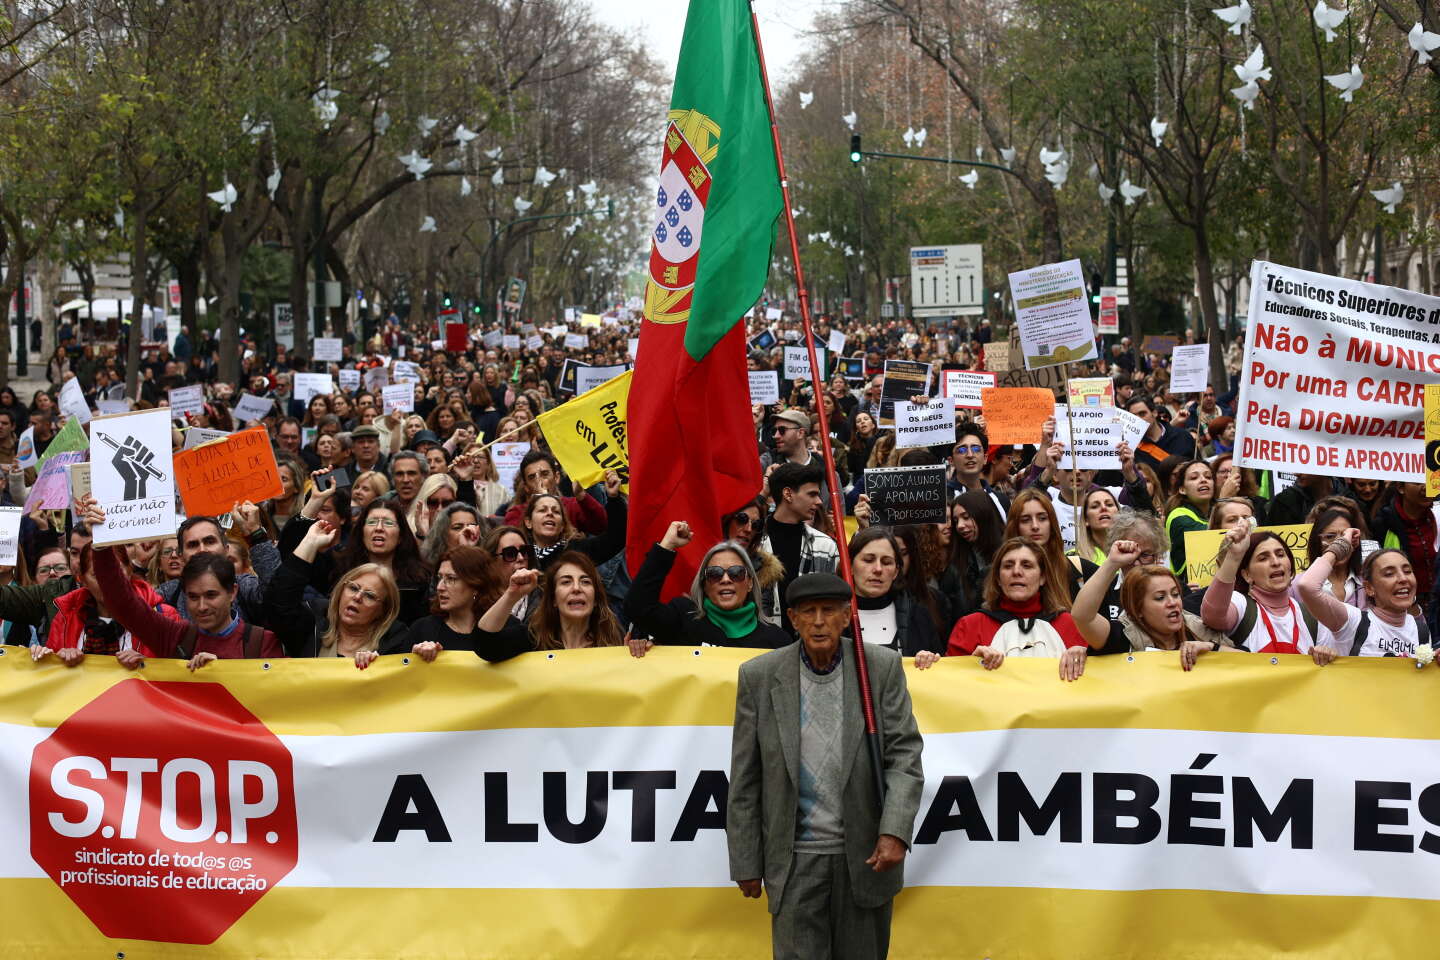 In Portugal, the addition of social movements weakens the socialist government